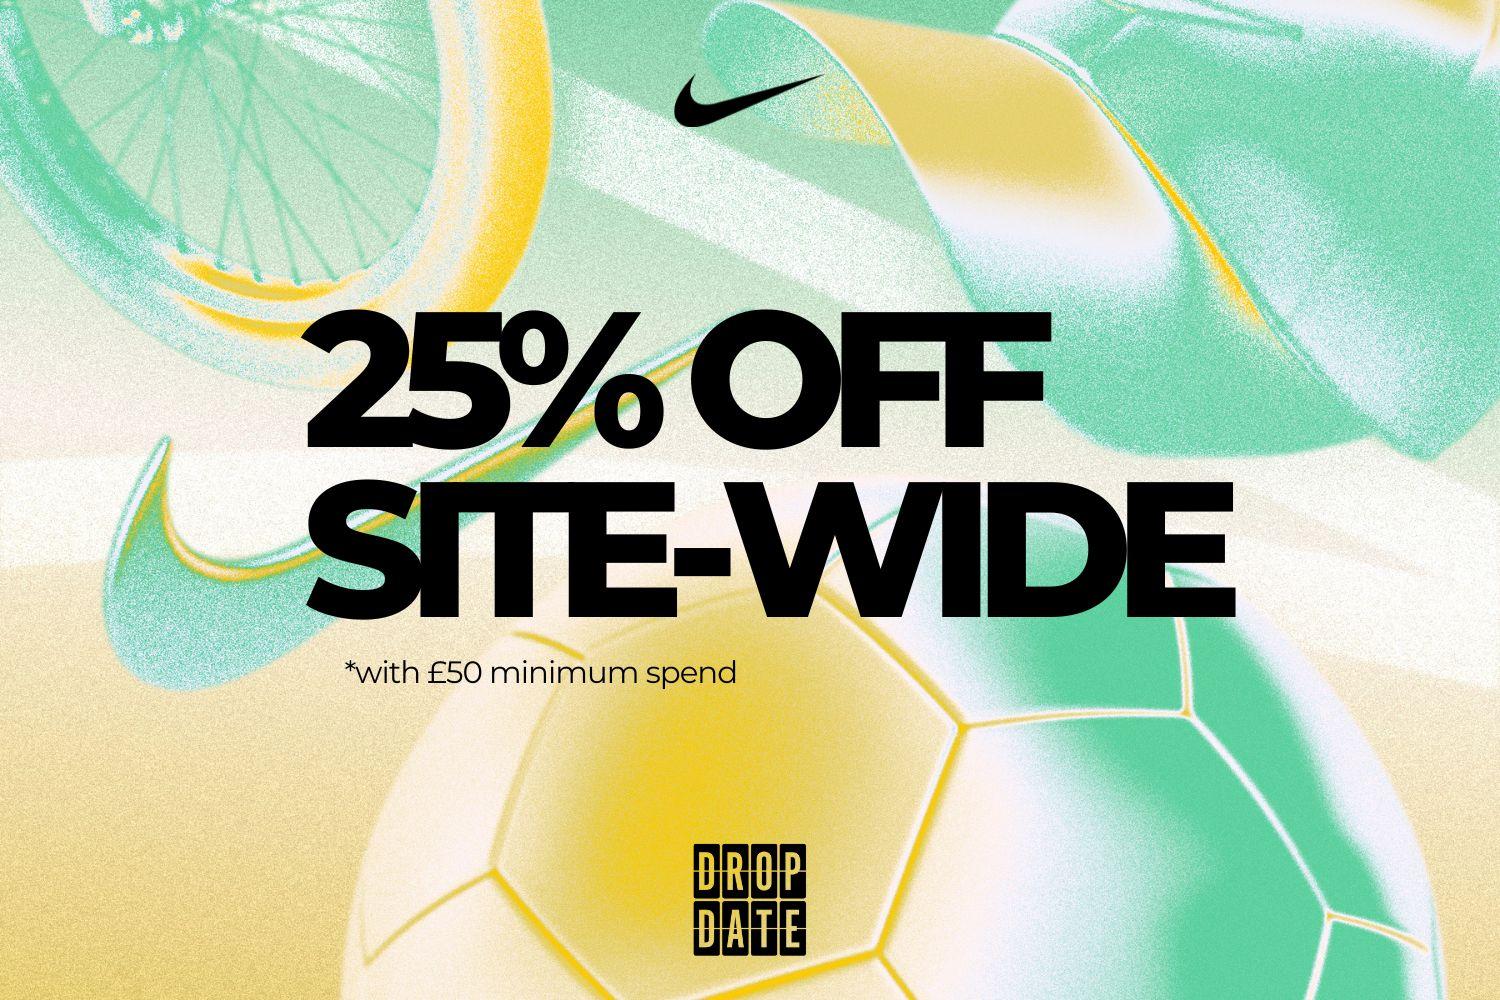 Get Ready for Summer with 25% Discount at Nike